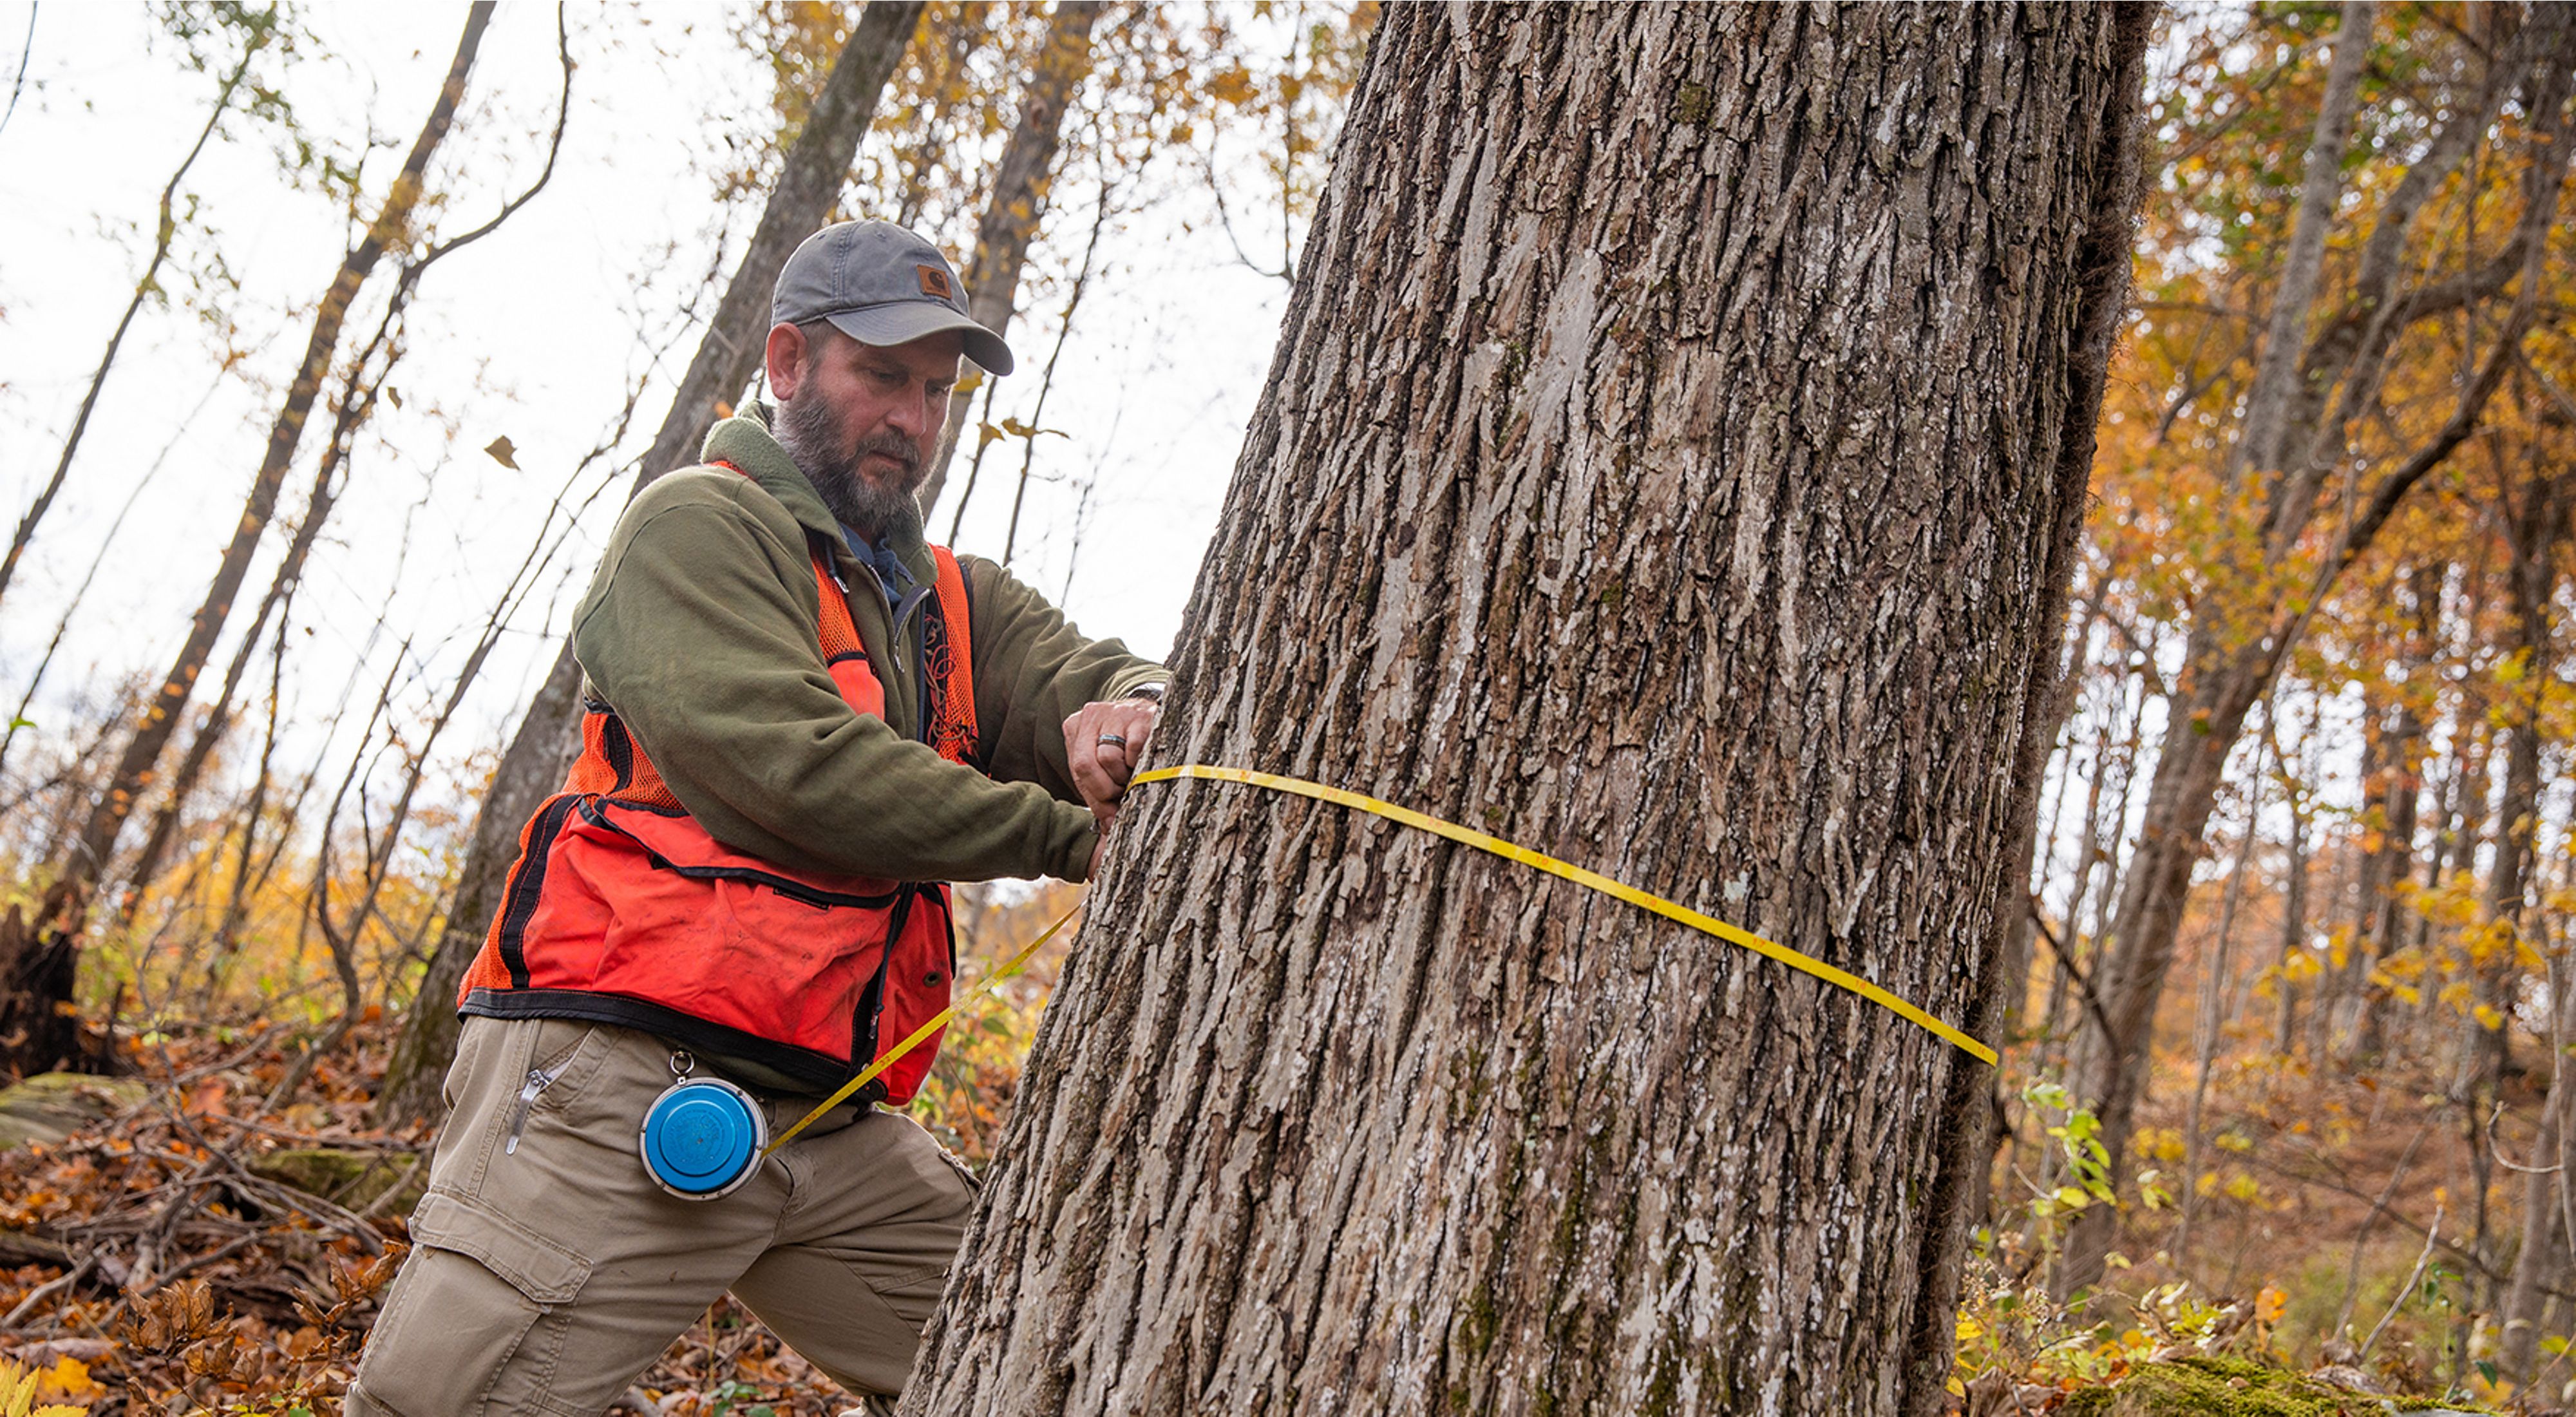 Forester measuring a tree with a tape measure.